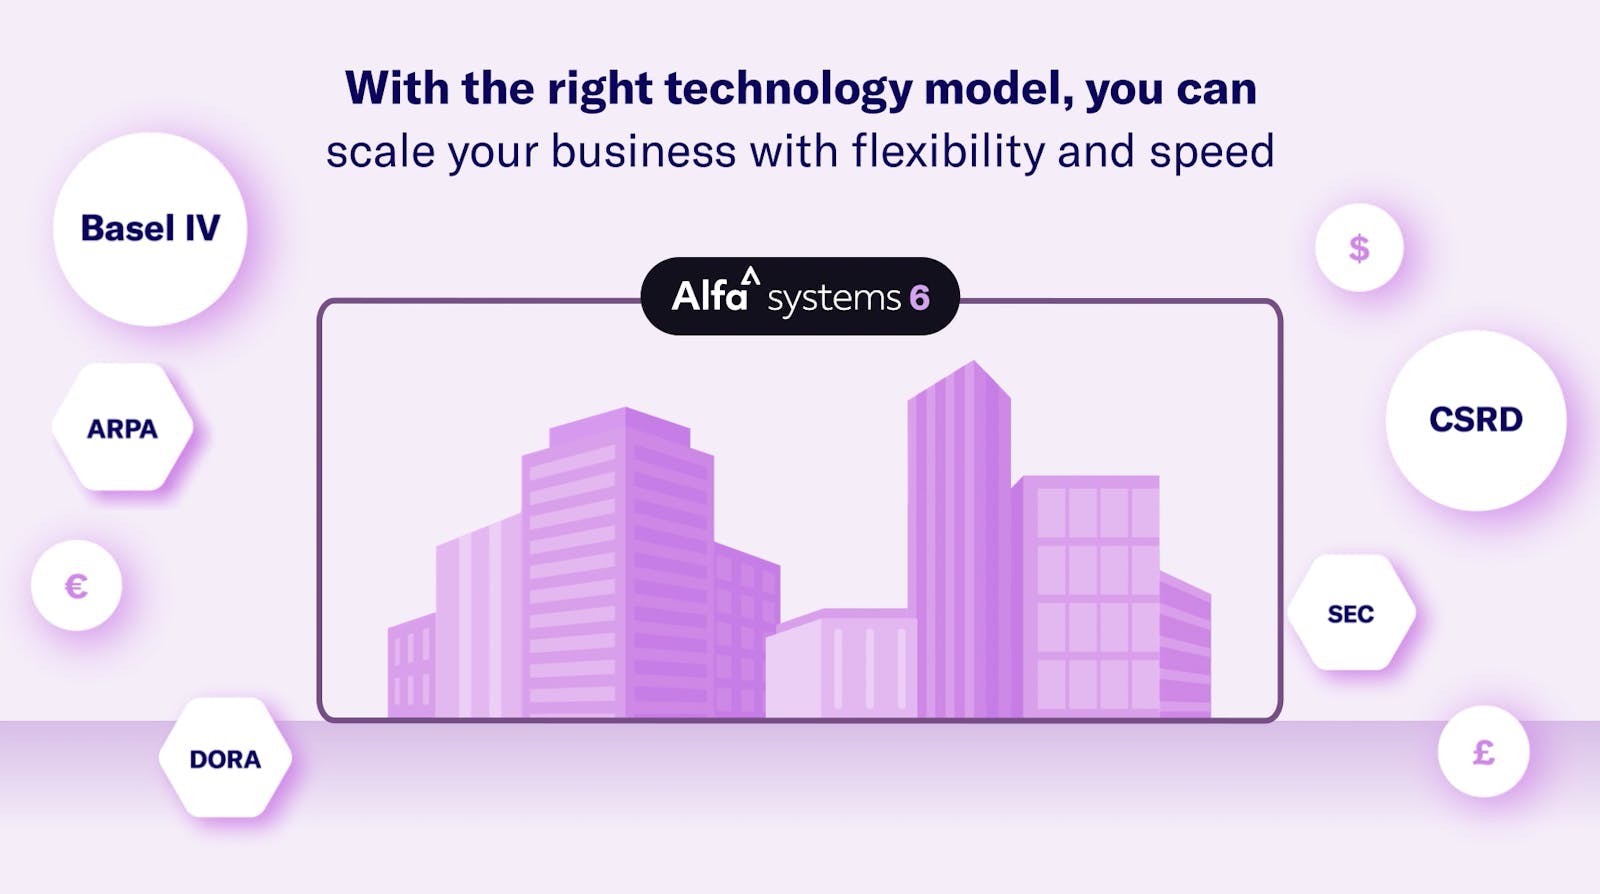 with the right technology model, you can scale your business with flexibility and speed